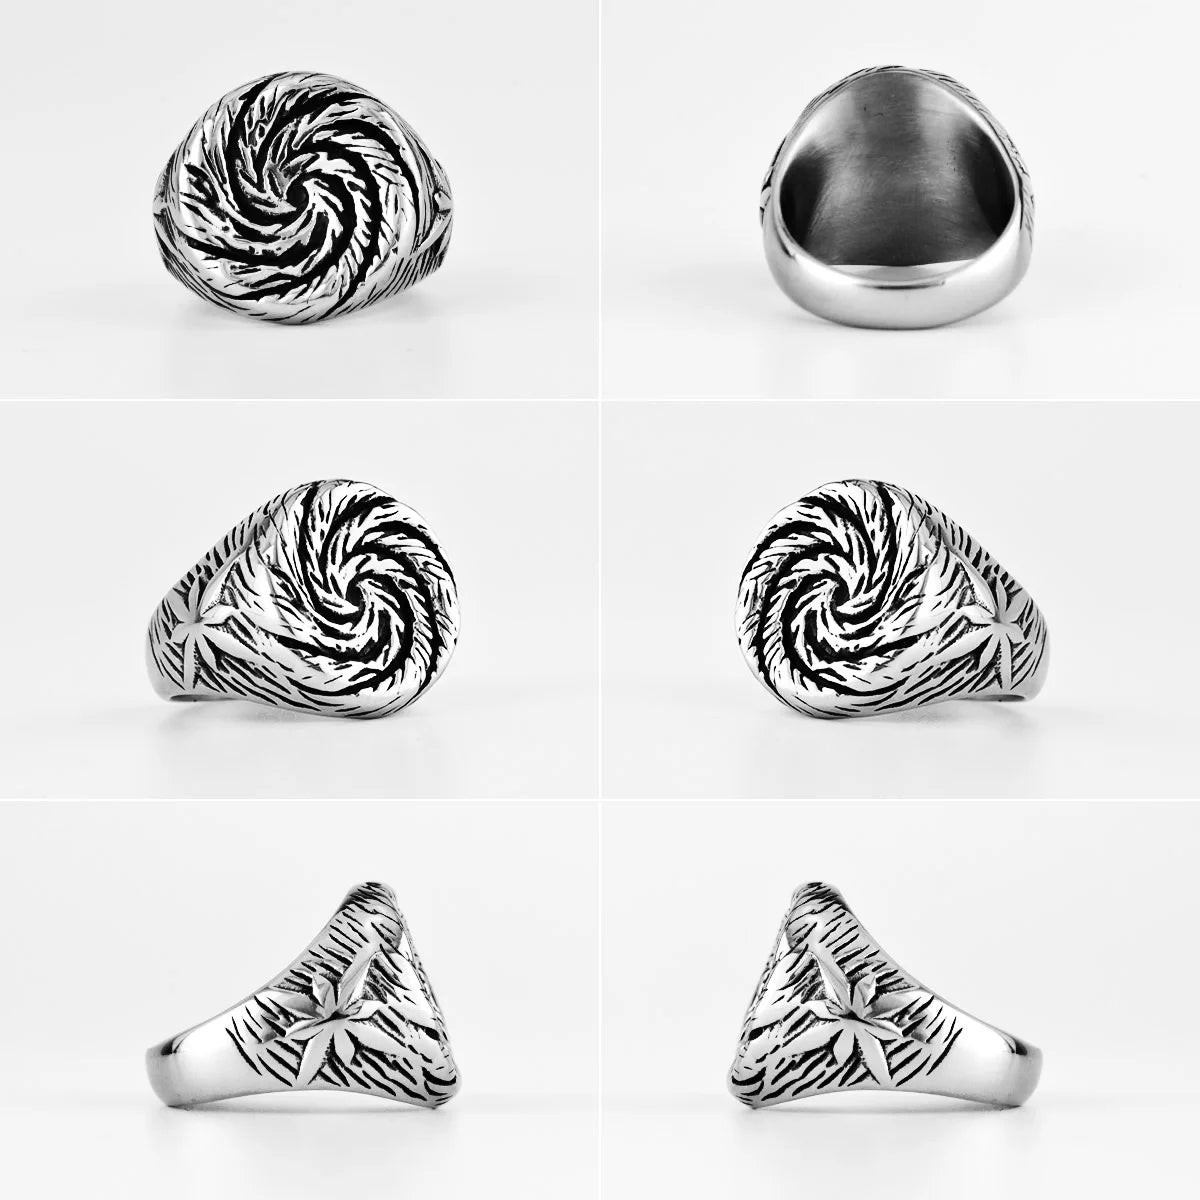 Vleee Unique Black Hole Swirl Flower Ring: Stainless Steel Men's Punk Amulet, adding a distinctive touch to men's fashion.